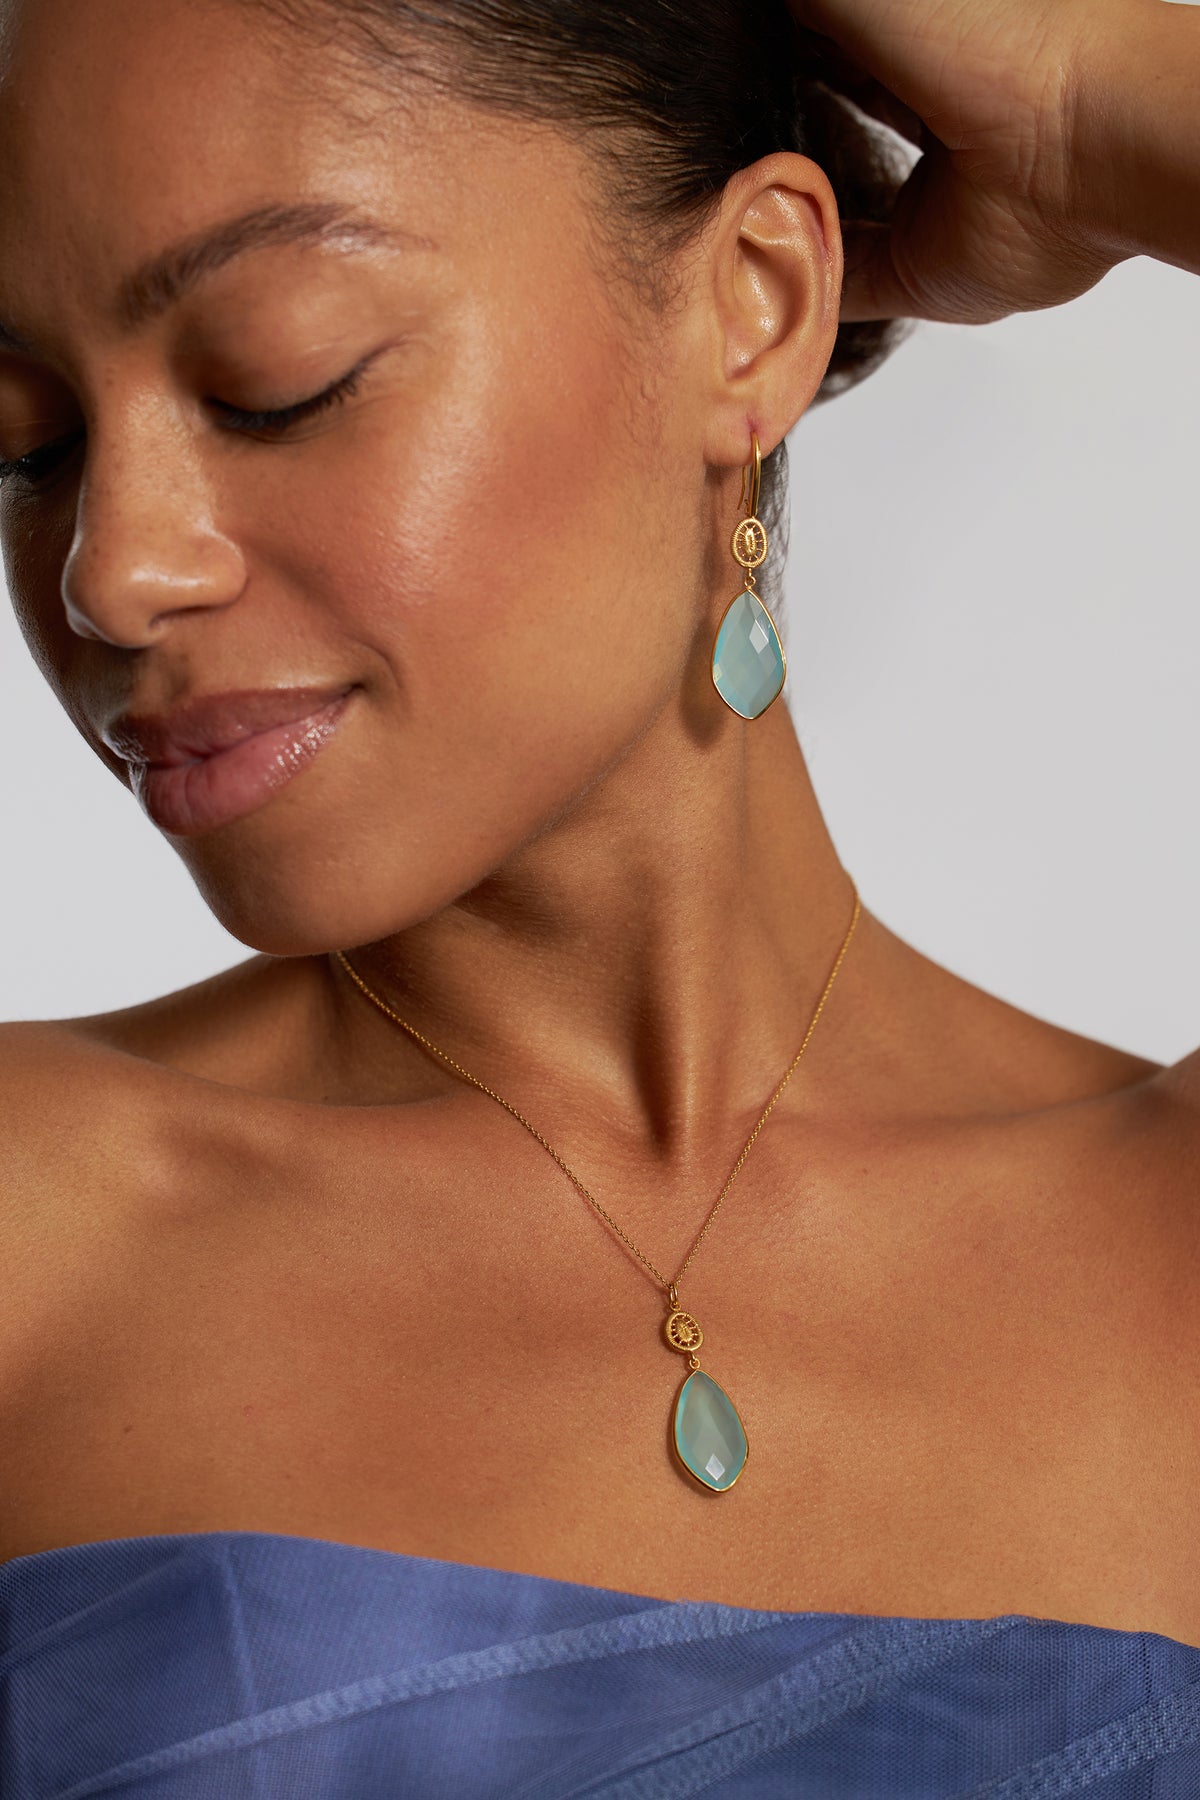 Aqua Chalcedony Matte Abstract Necklace